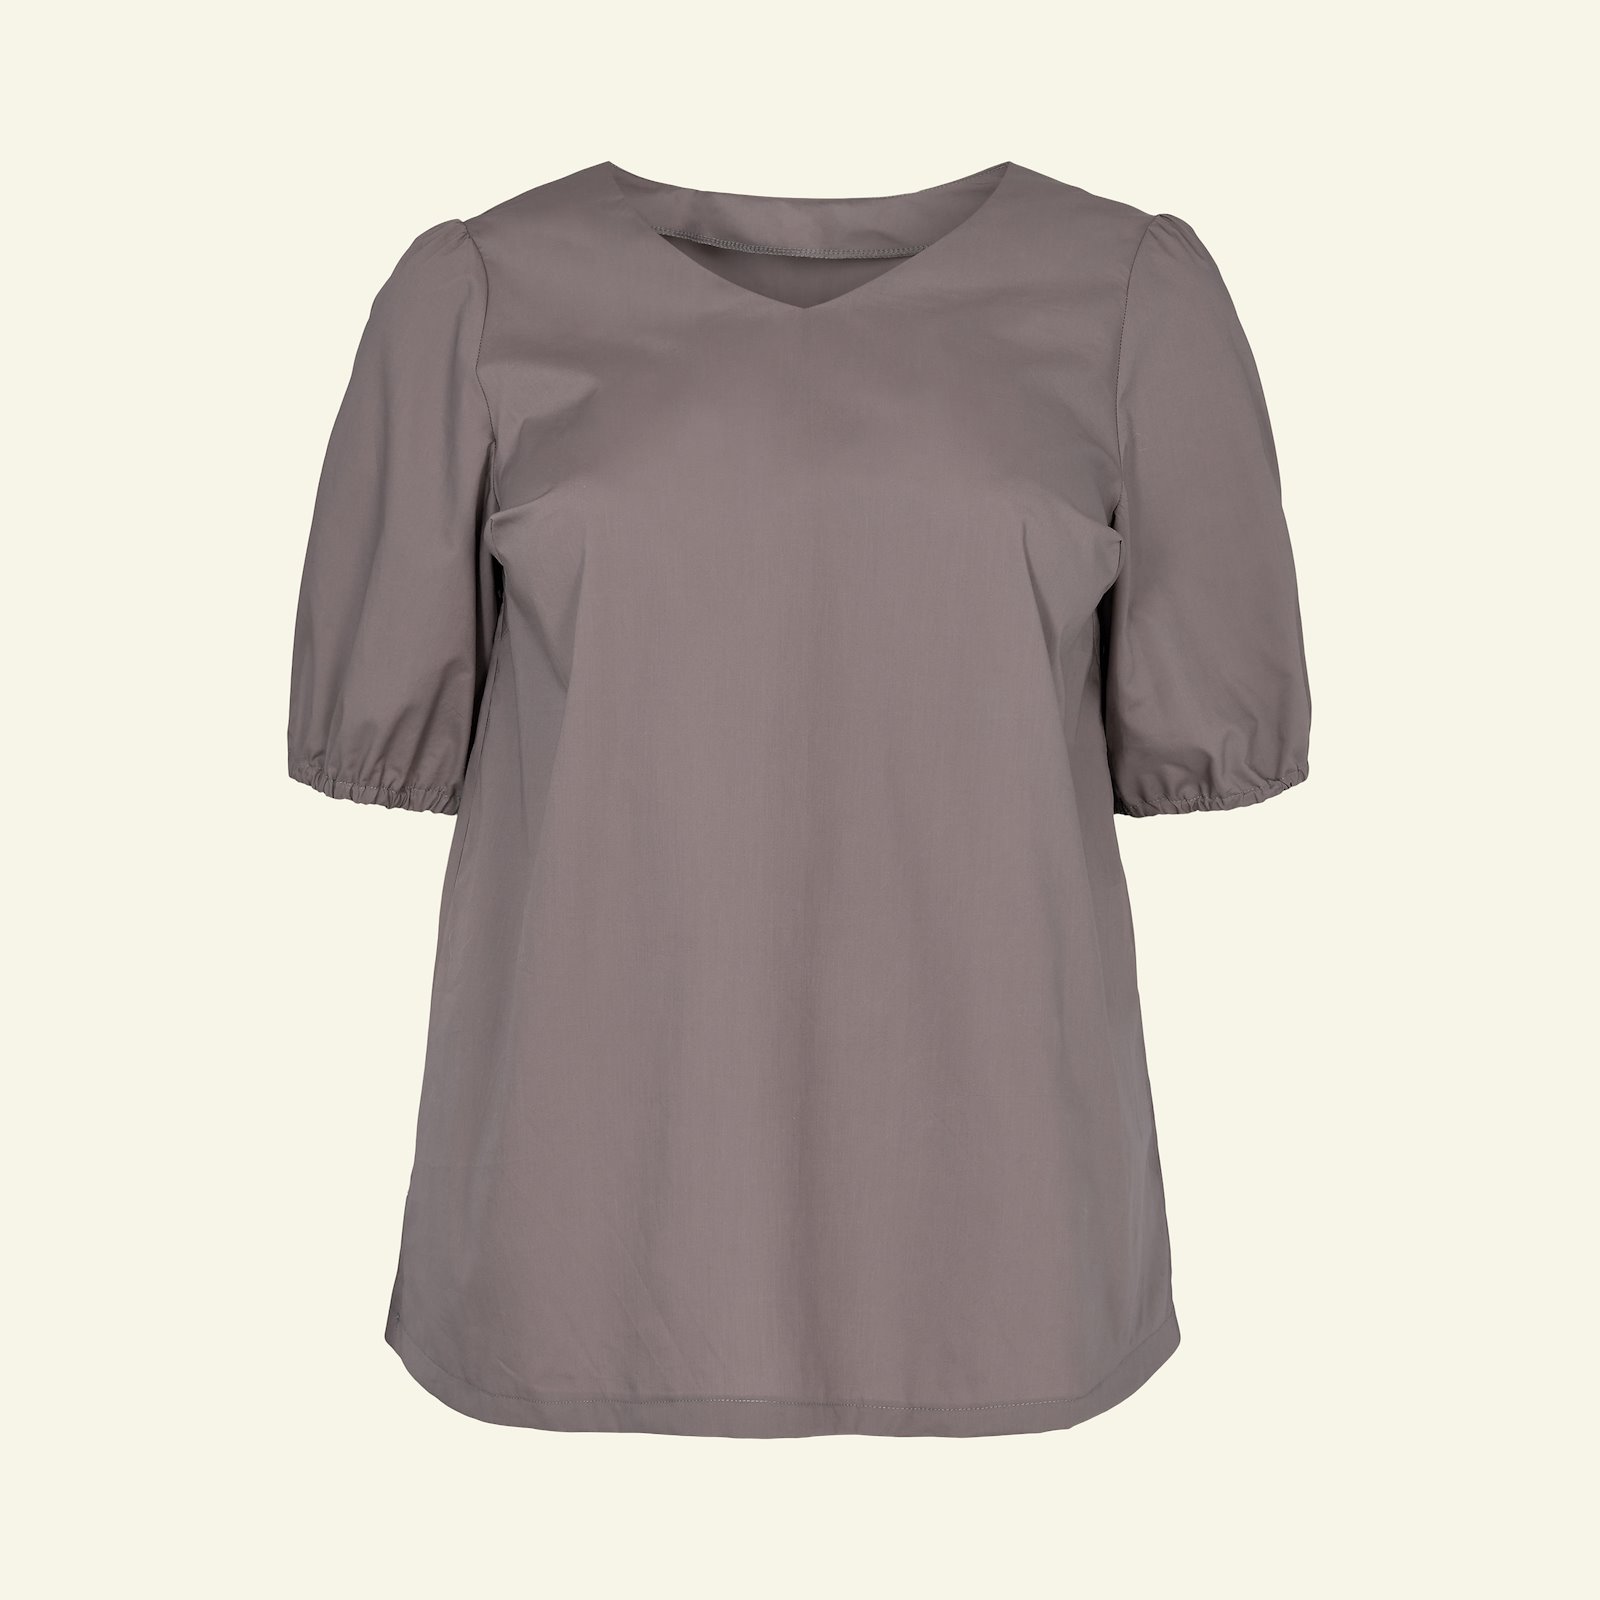 Blouse with long and short sleeve, 52/24 p72006_540121_sskit